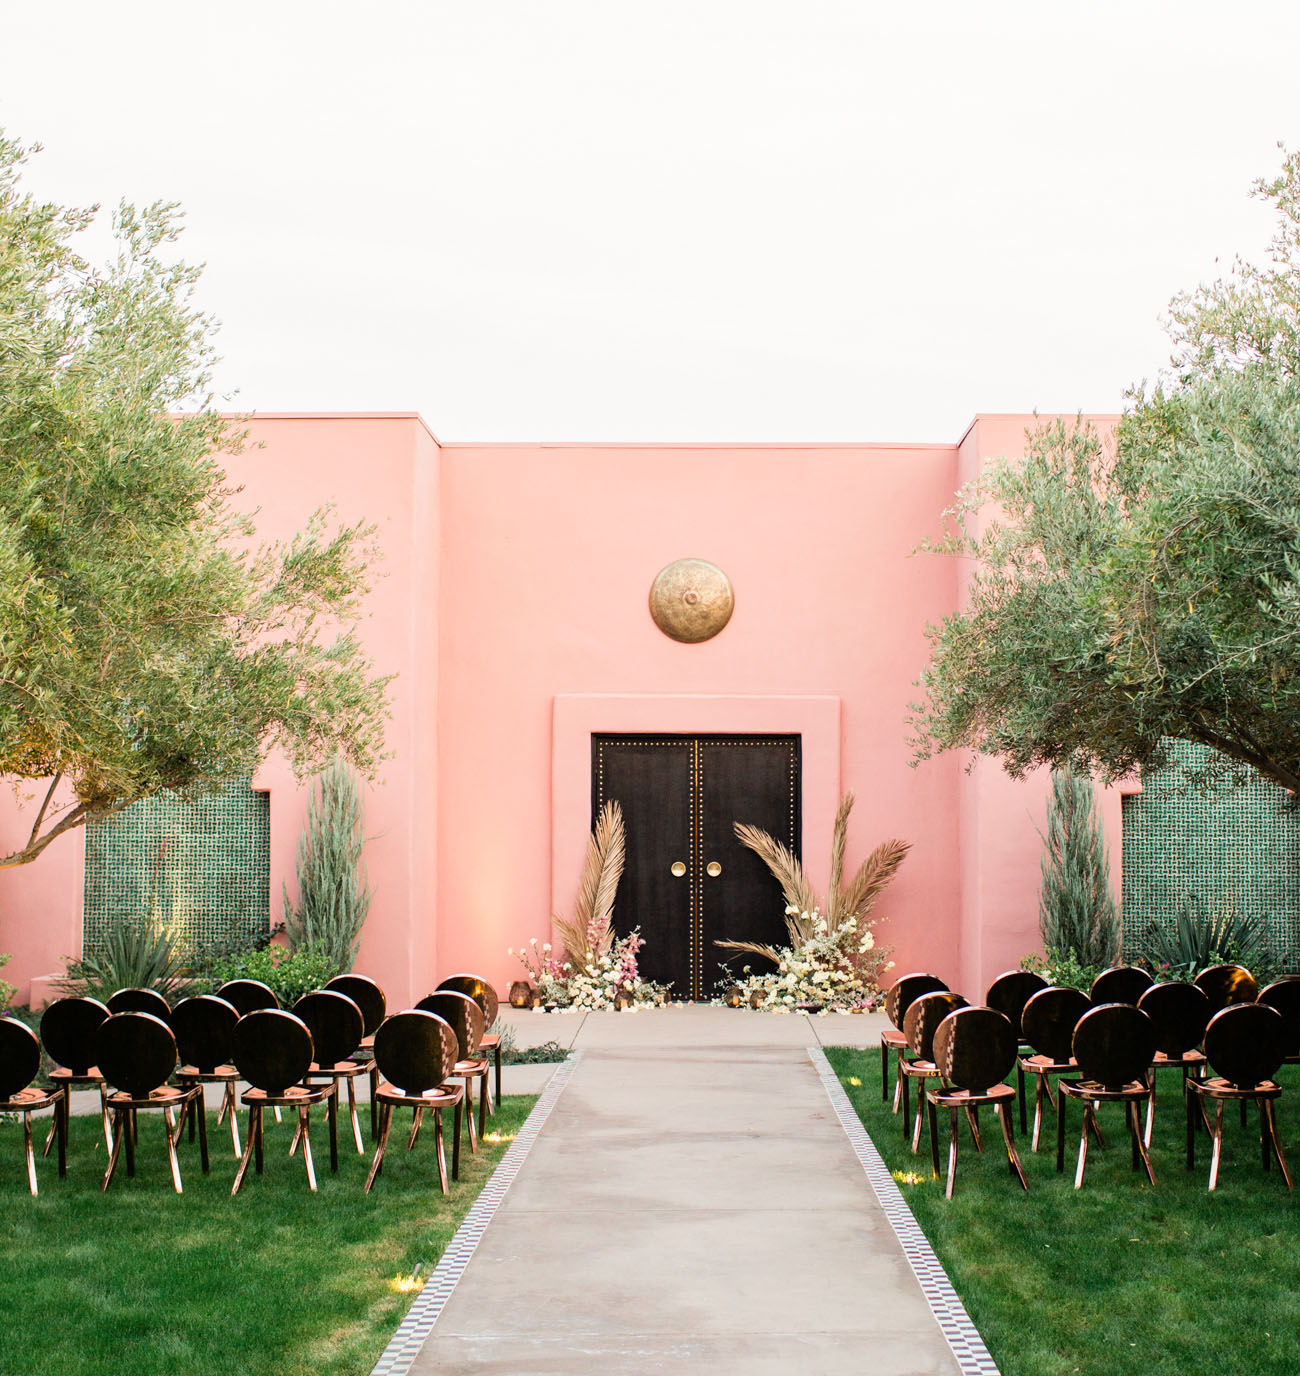 The wedding ceremony space was done in pink, black and gold and with black and gold chairs